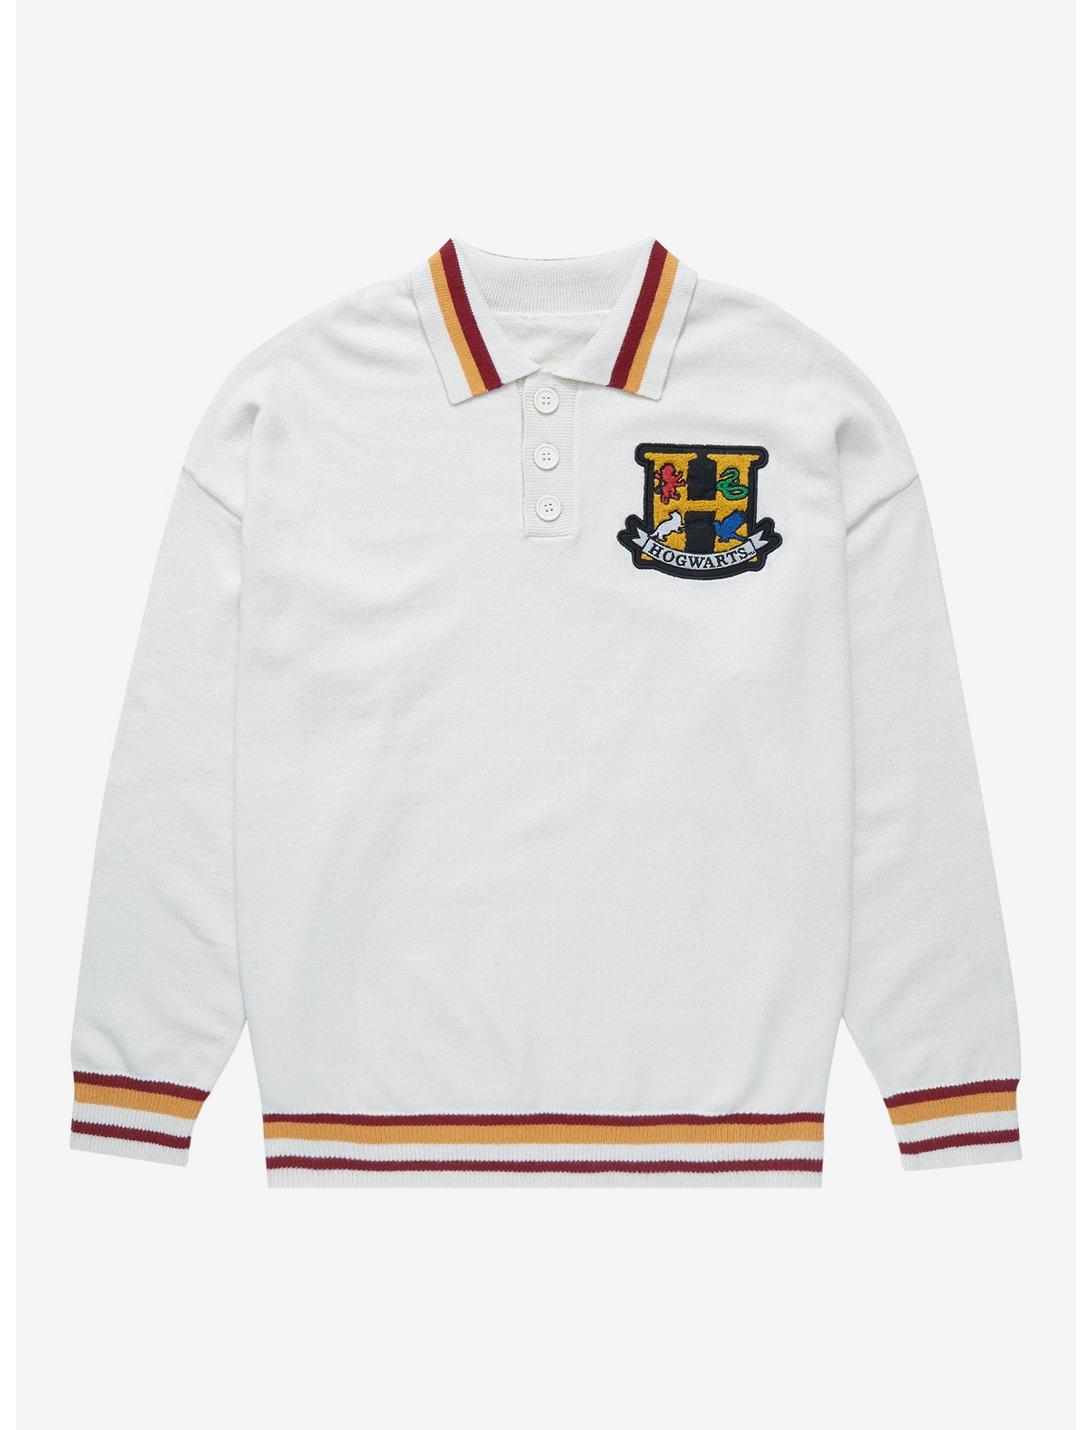 Harry Potter Hogwarts Letterman Collared Sweater - BoxLunch Exclusive , OFF WHITE, hi-res